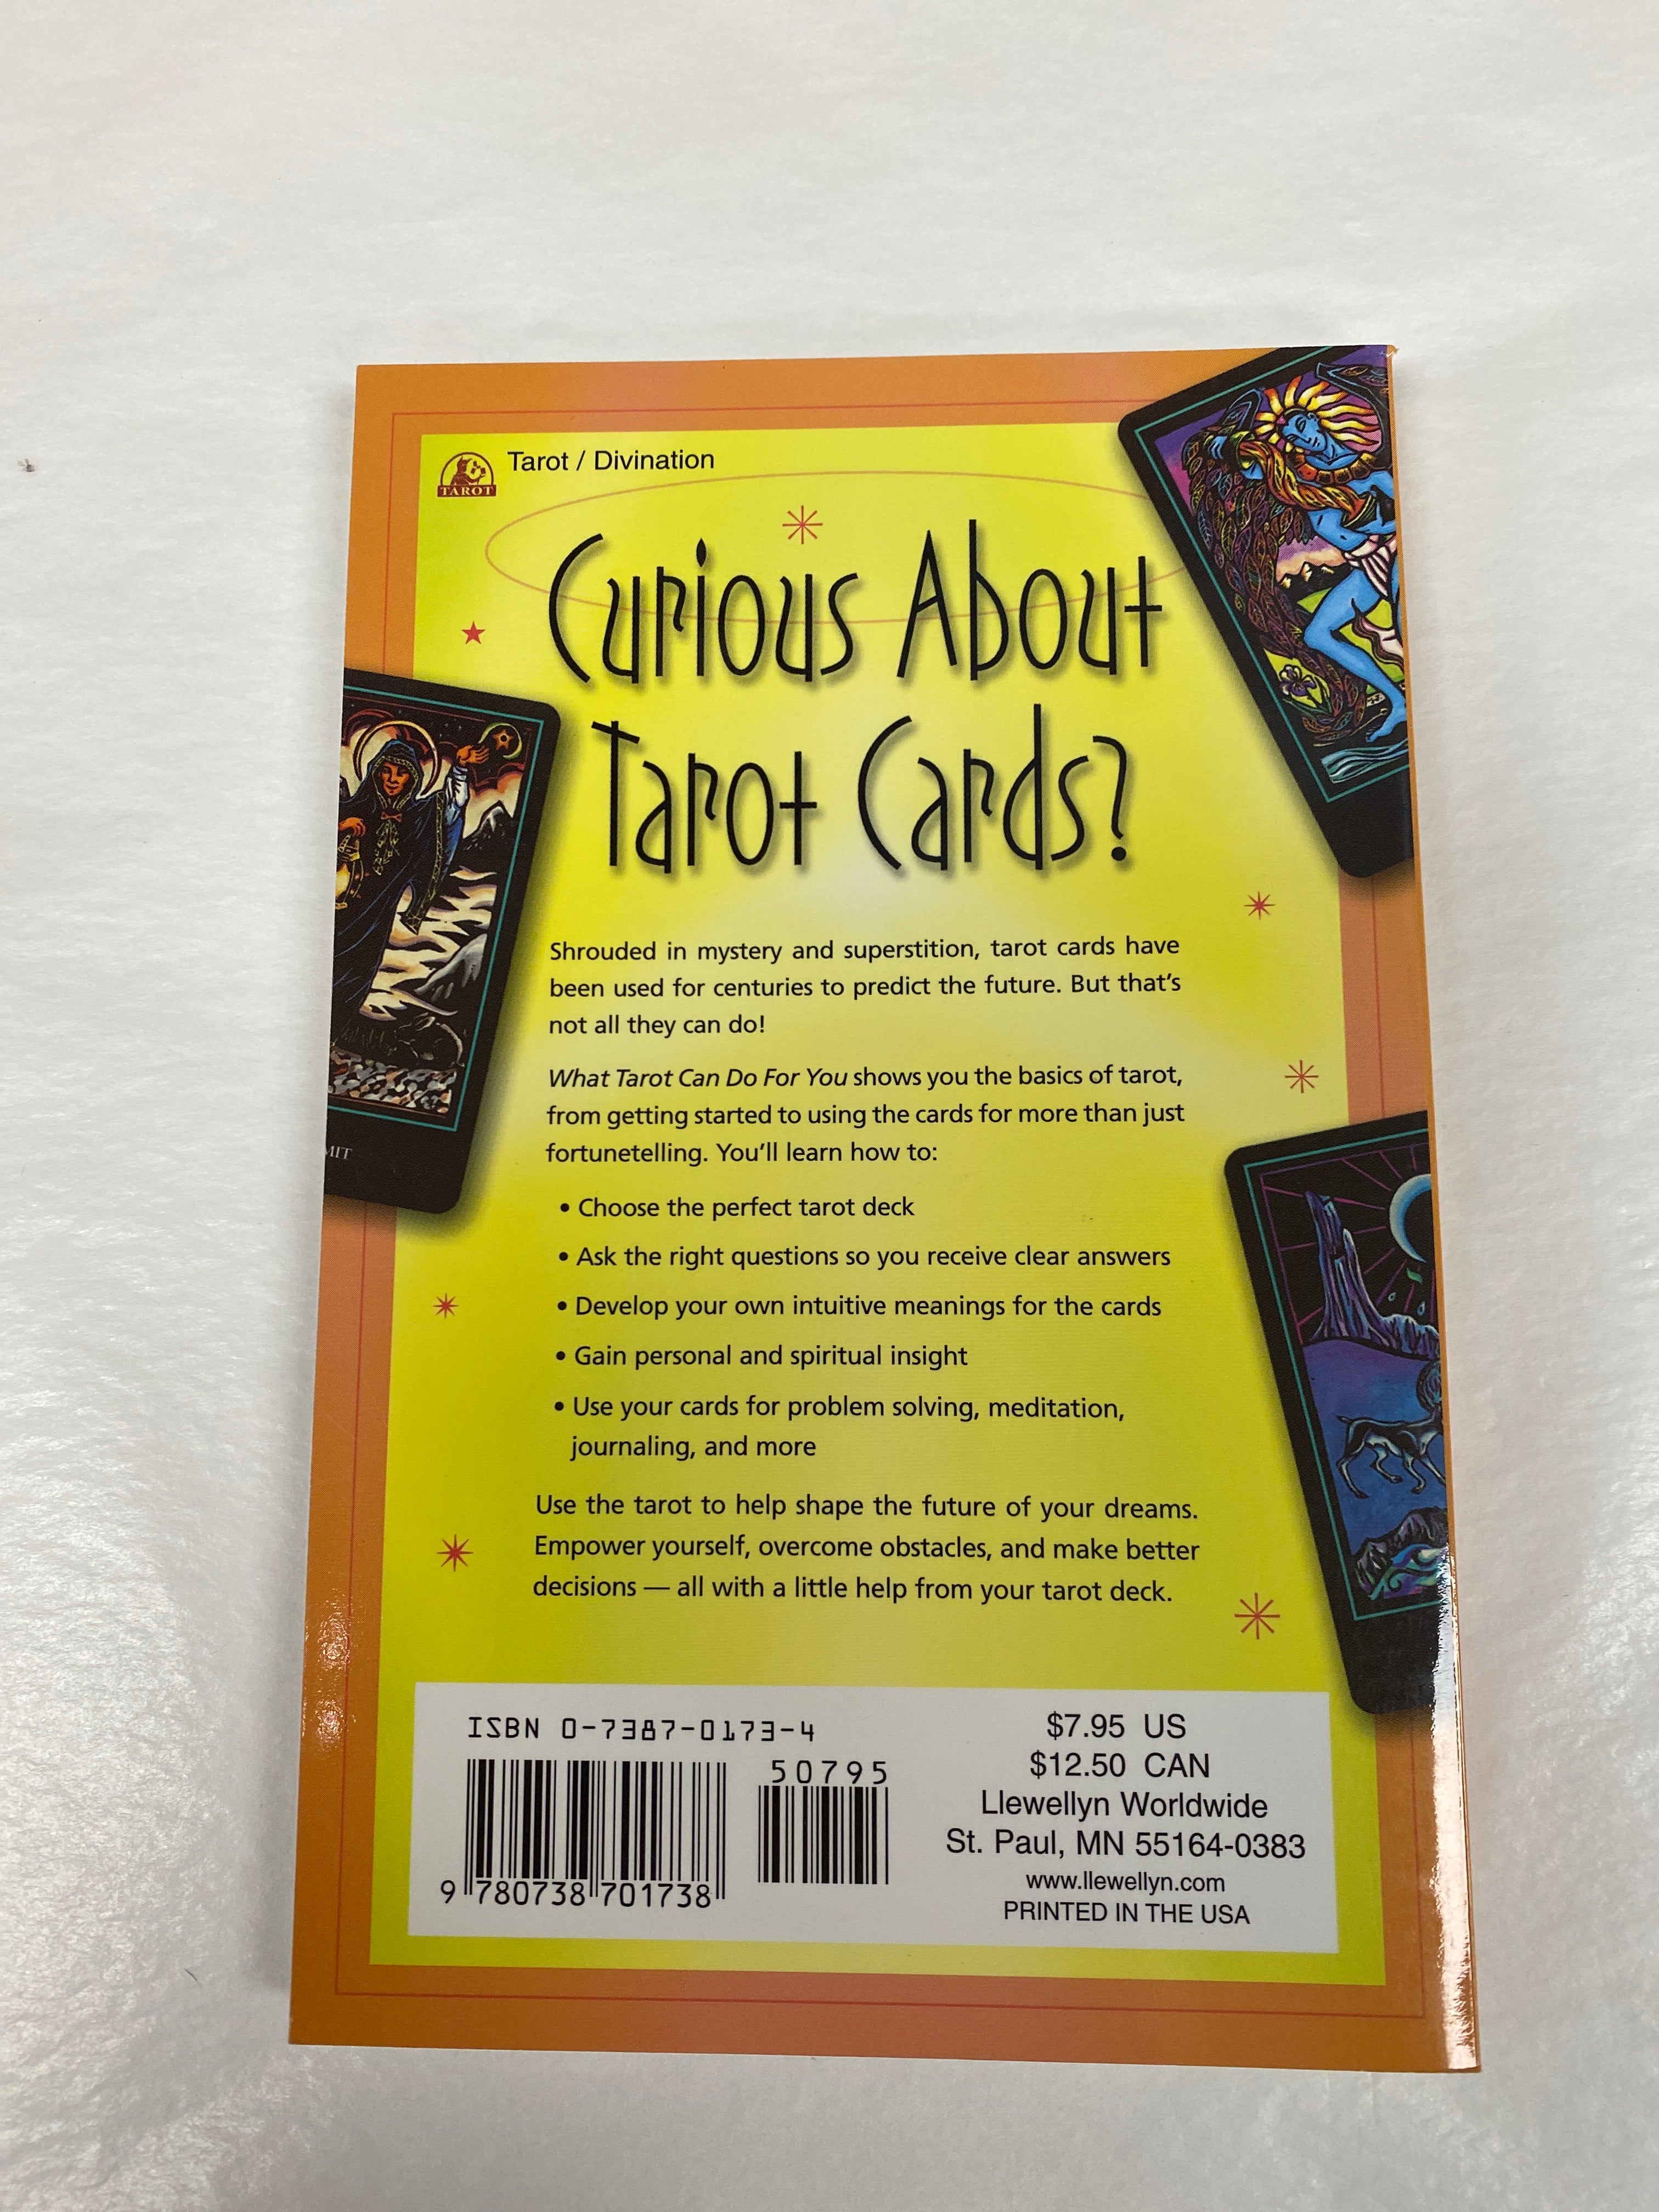 What Tarot Can Do For You